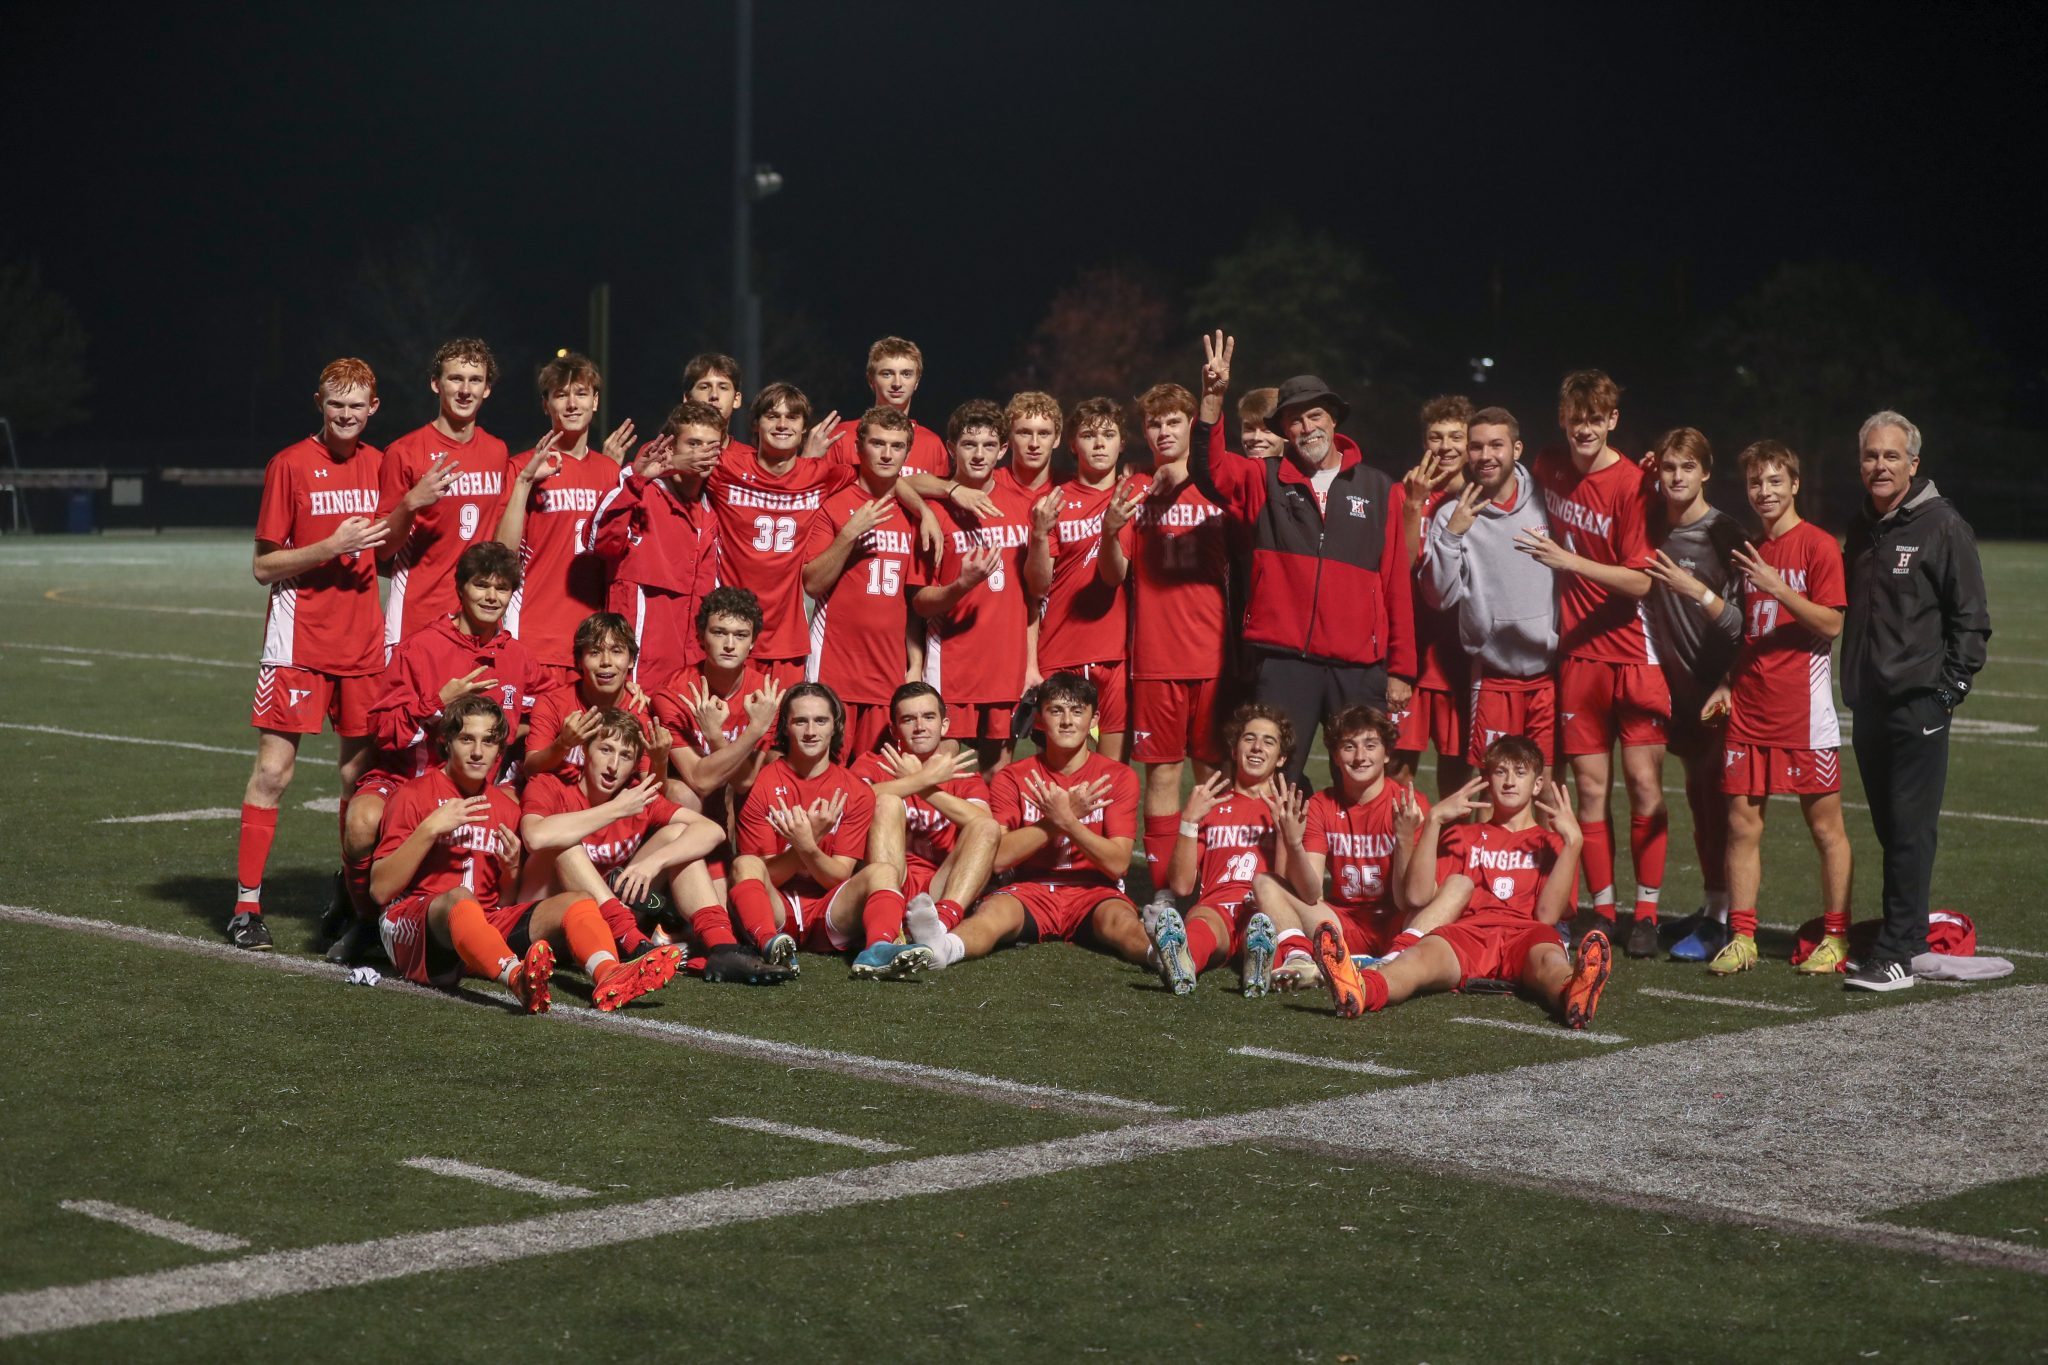 The 22/23 Boys Soccer team celebrates coach Ken Carlin's 300th win after last night's game. 